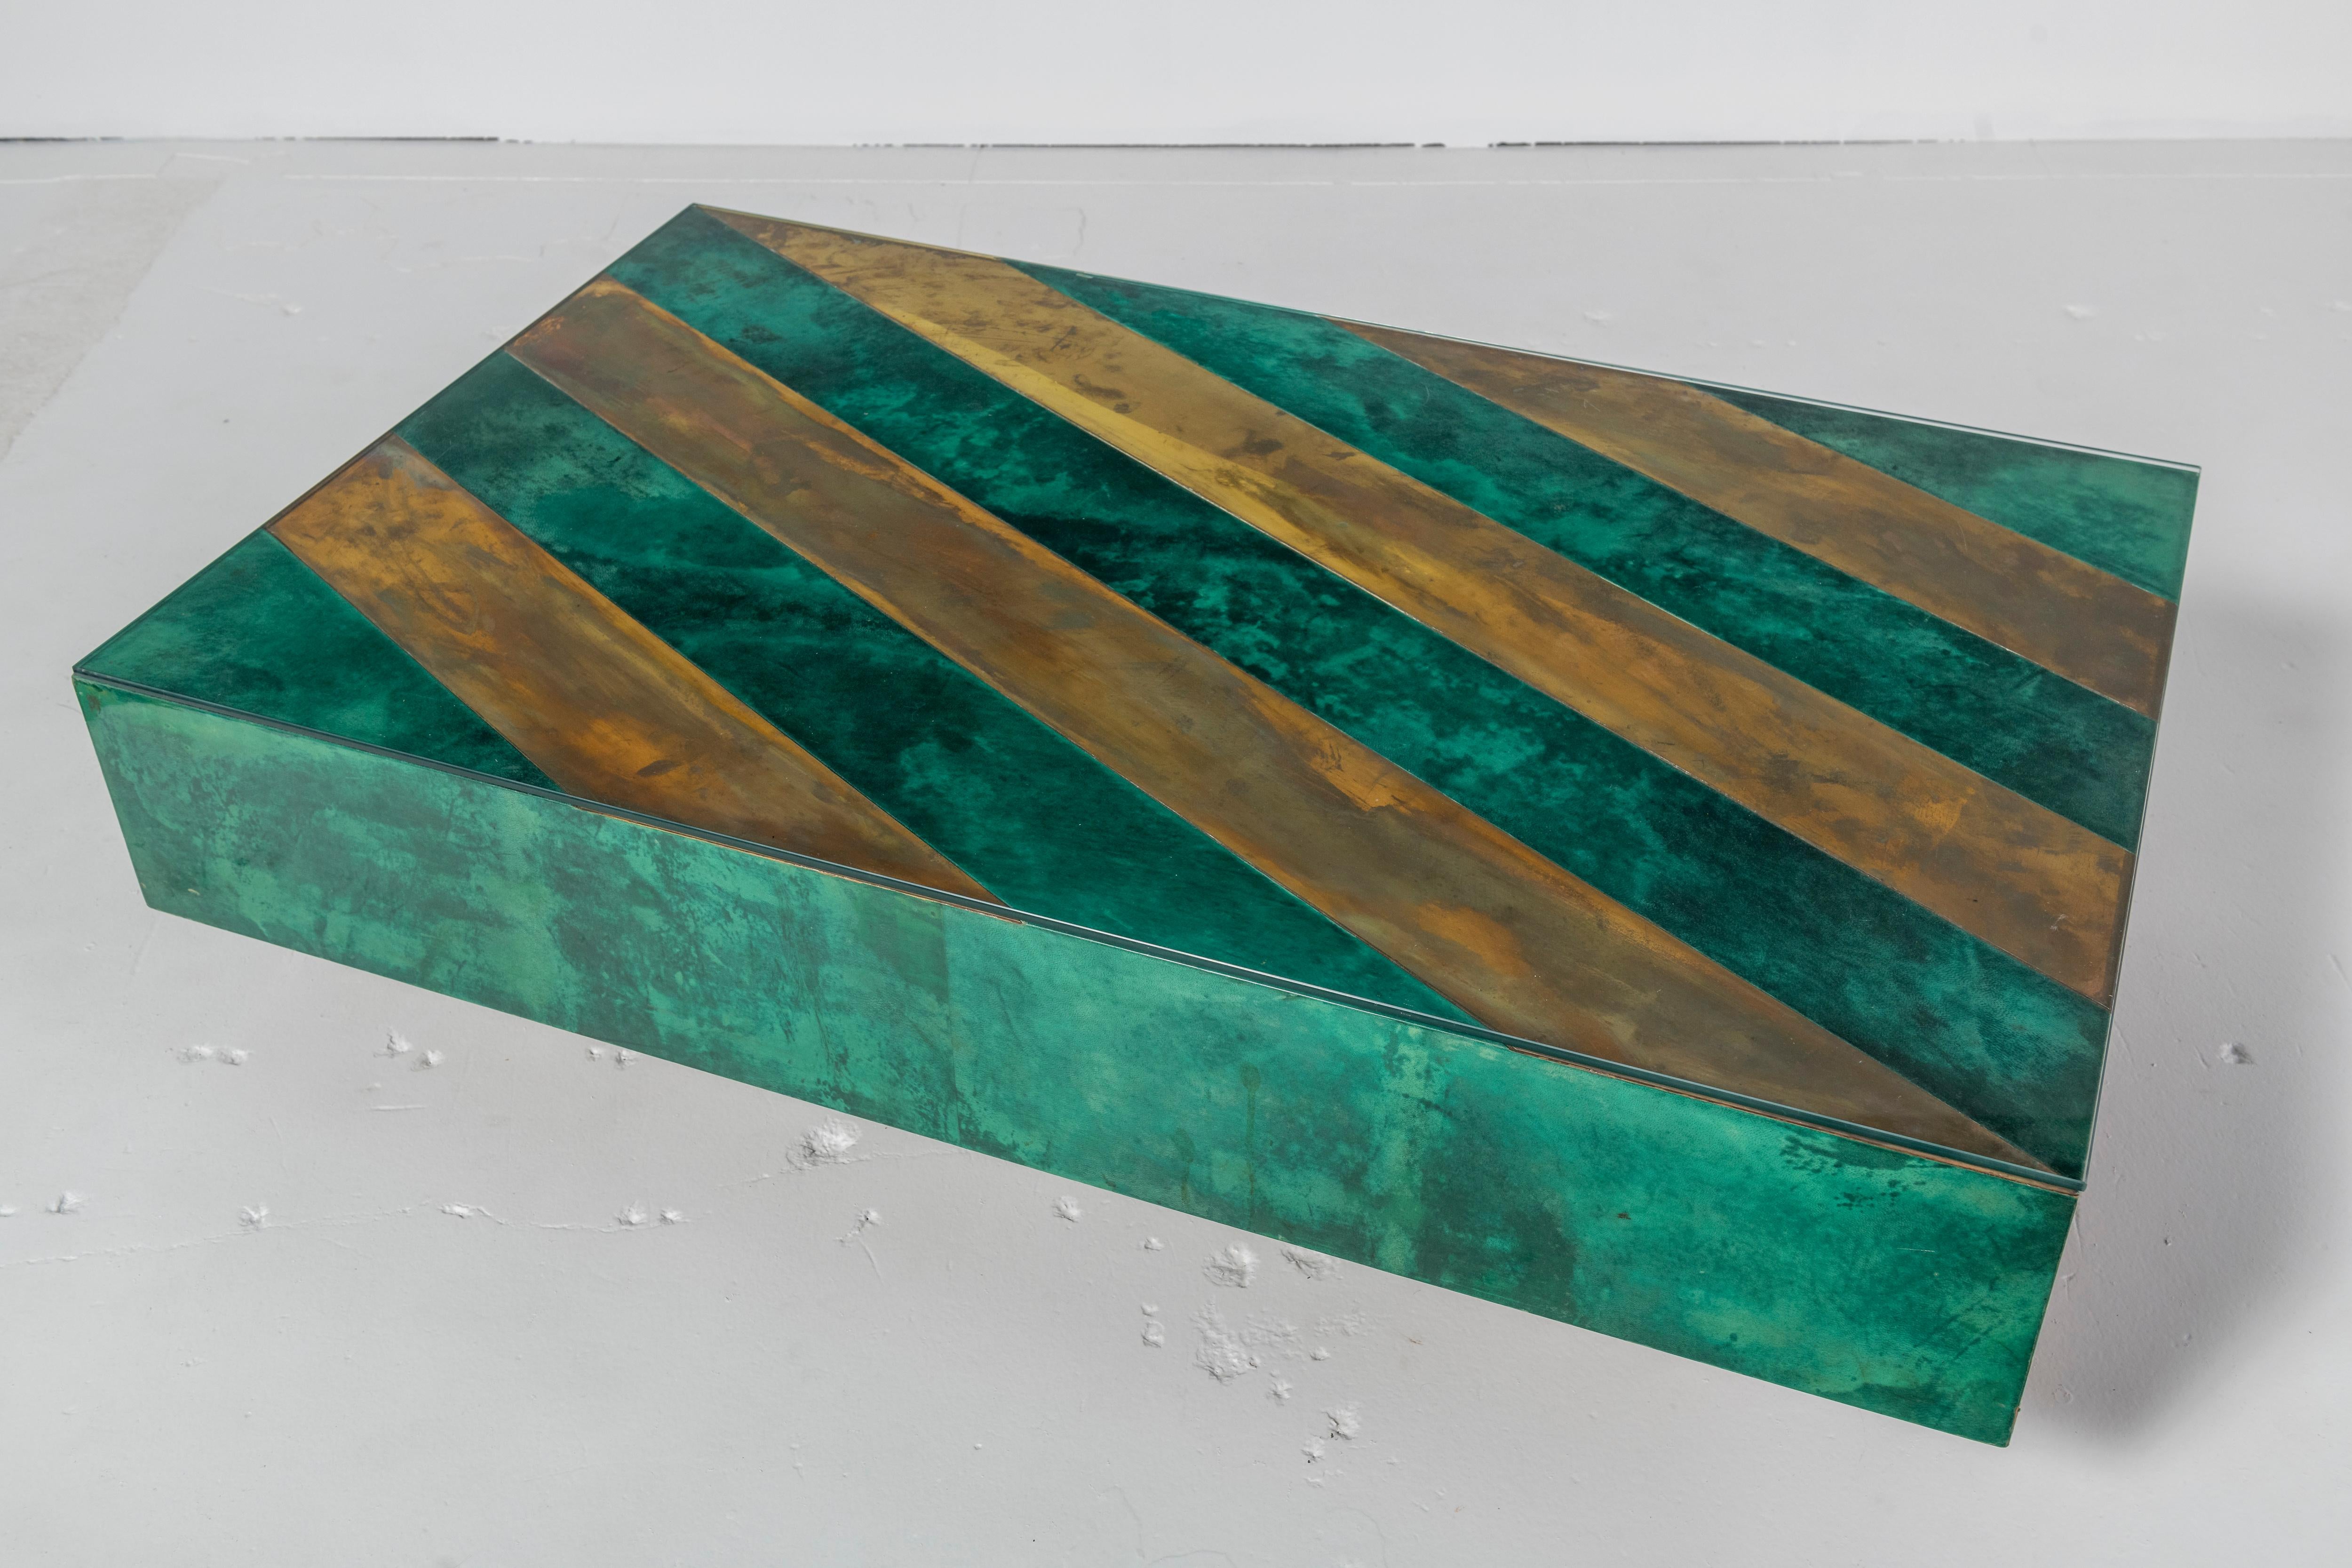 20th Century Aldo Tura Coffee Table in Emerald Green Parchment with Brass Inlay, 1979 For Sale